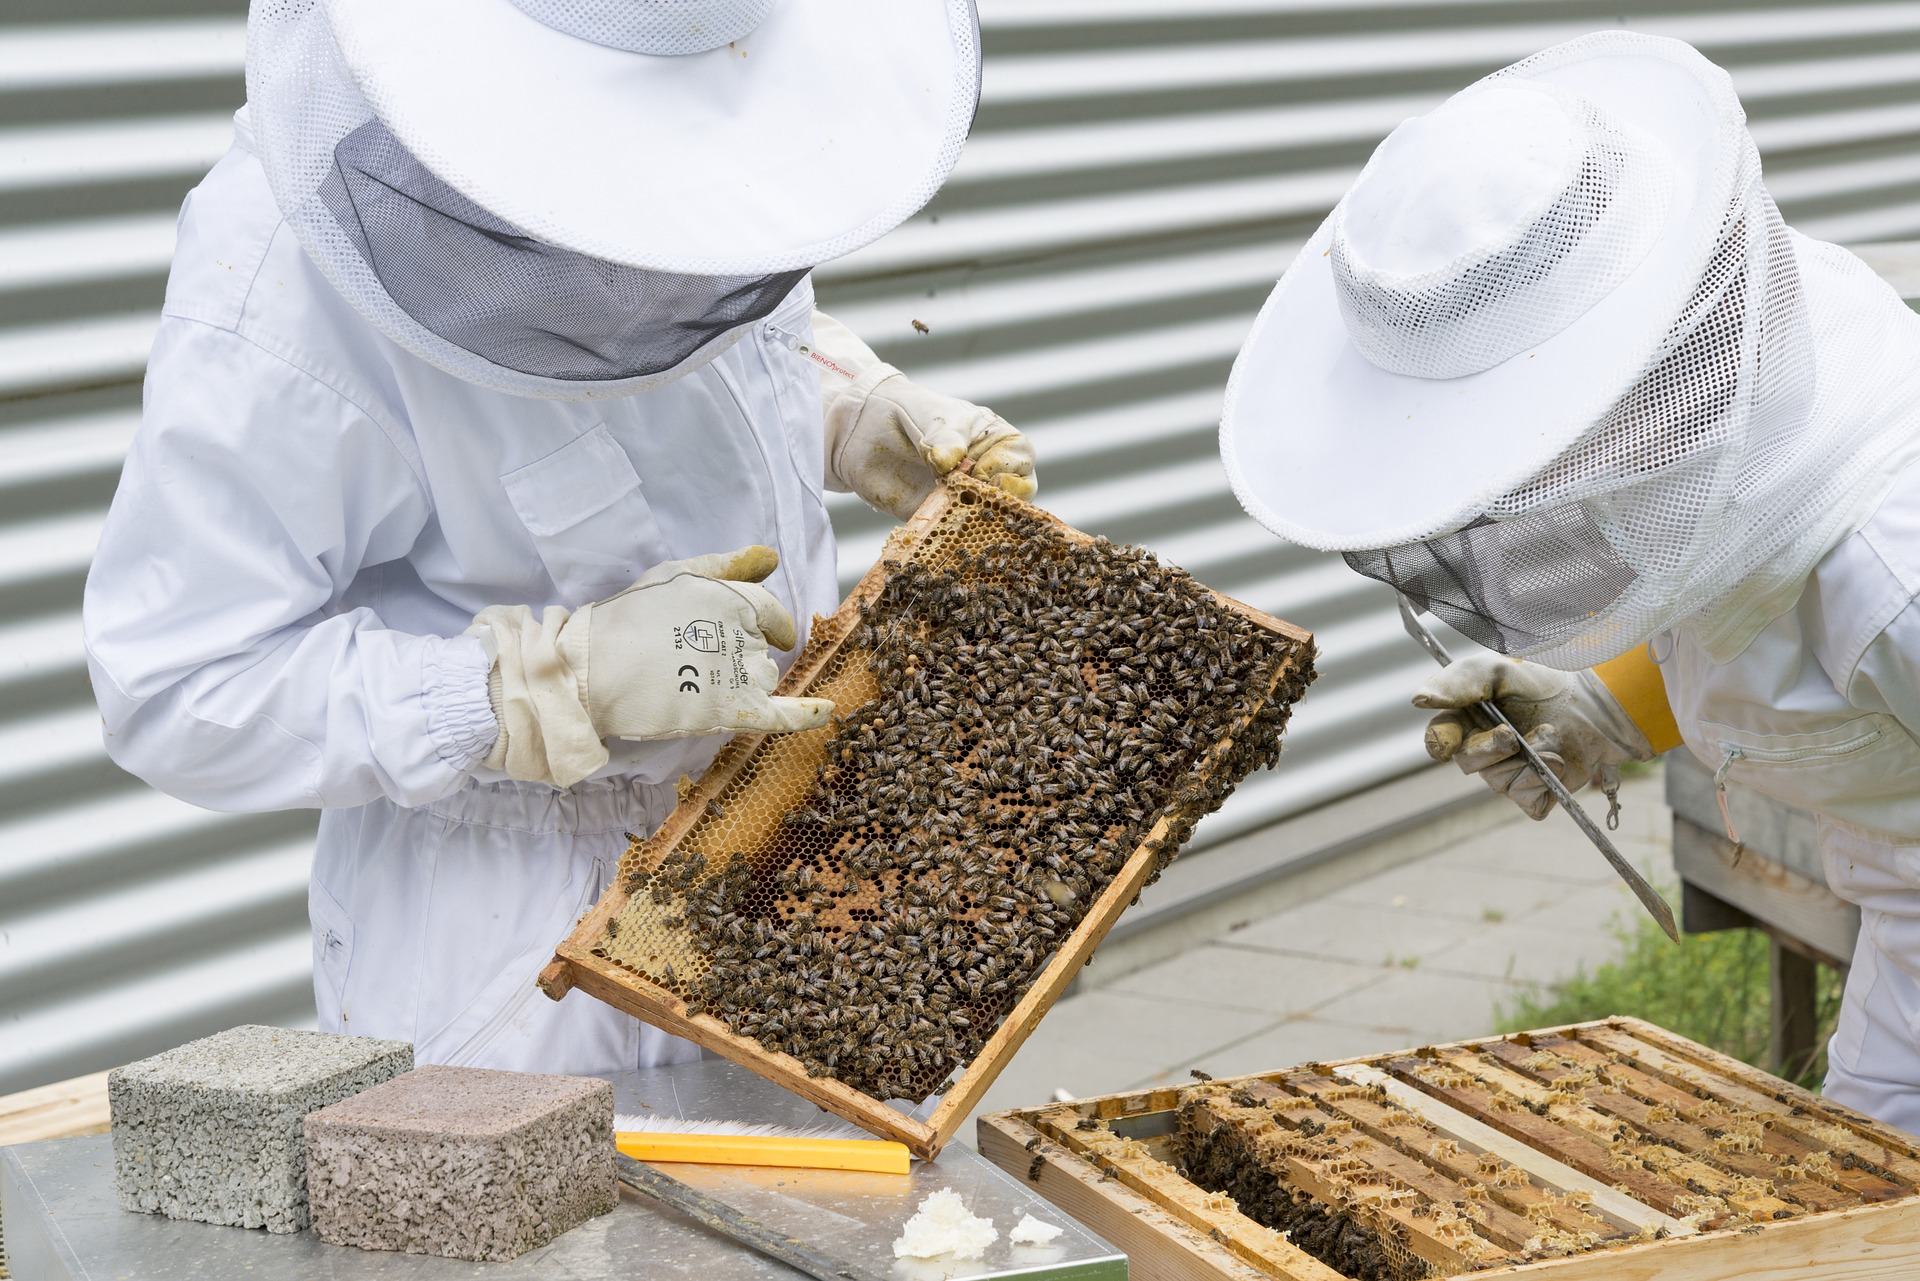 Science and public polling make it clear: New York must restrict bee-killing neonicotinoids